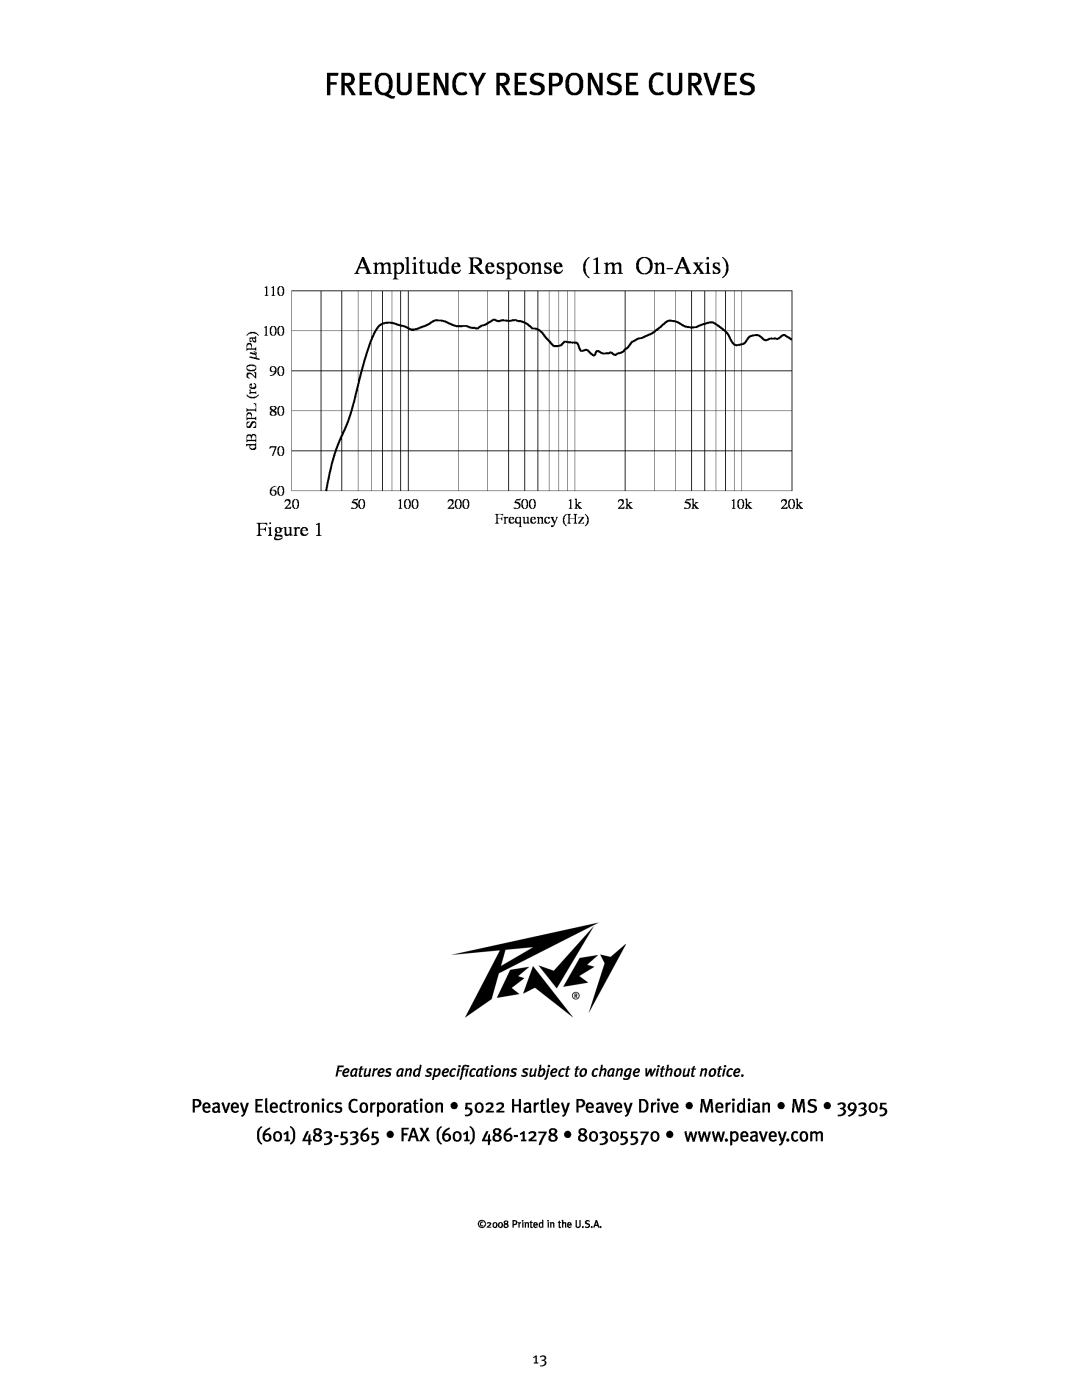 Peavey 12 D manual Frequency Response Curves, Amplitude Response, 1m On-Axis 